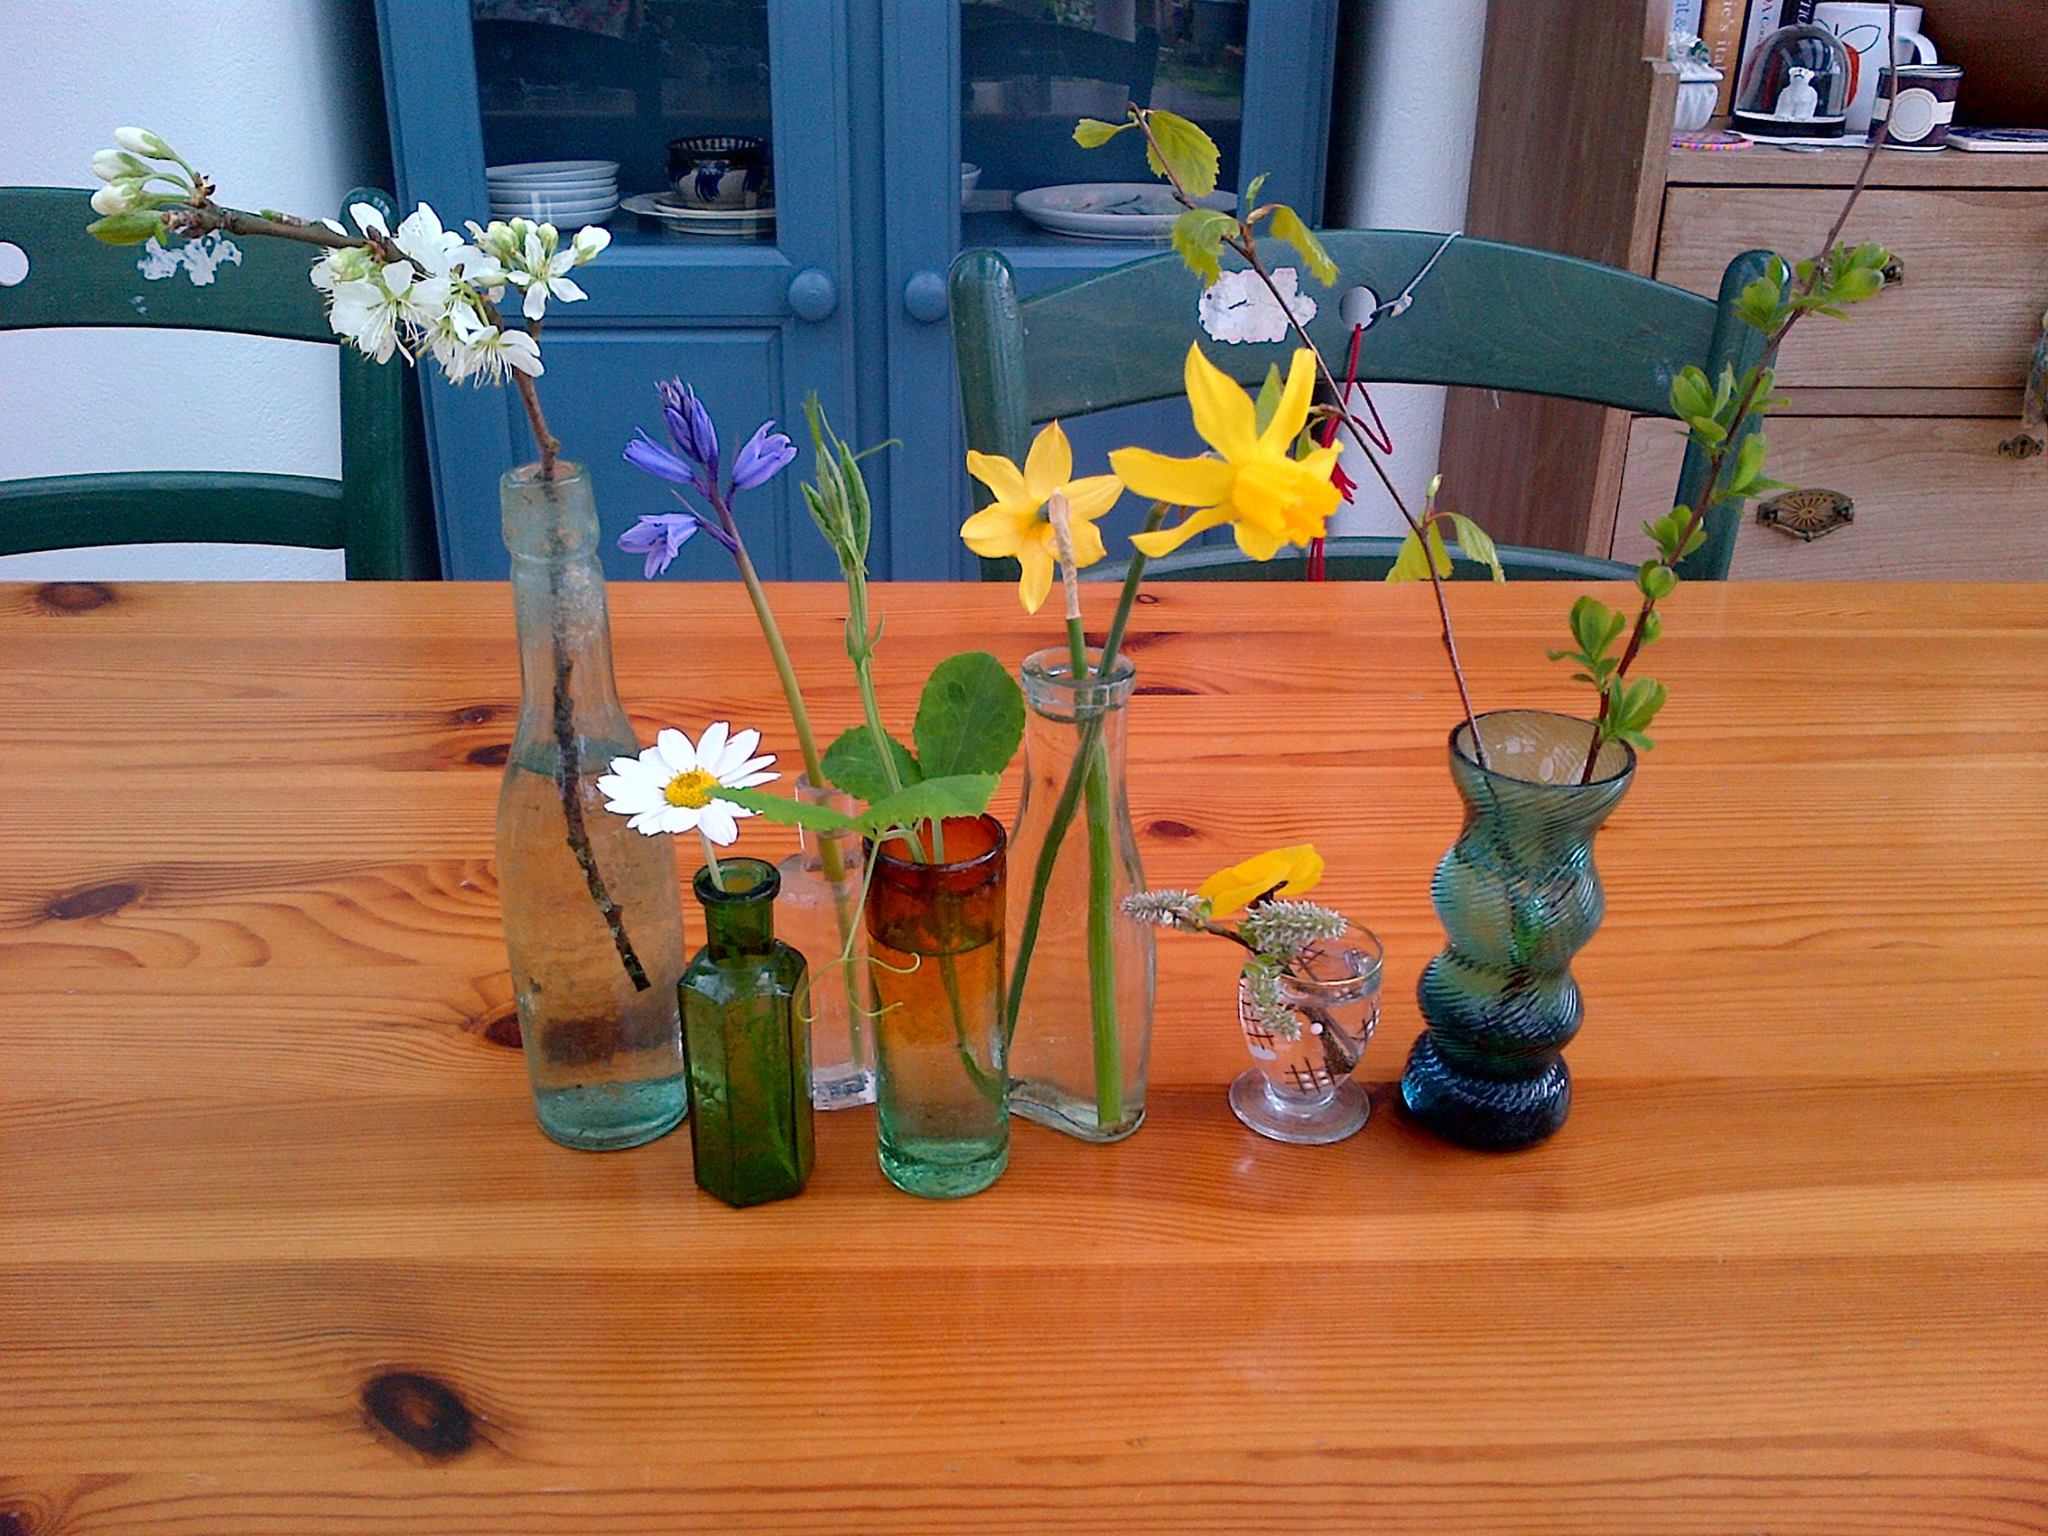 several small vases with flowers sat on a table